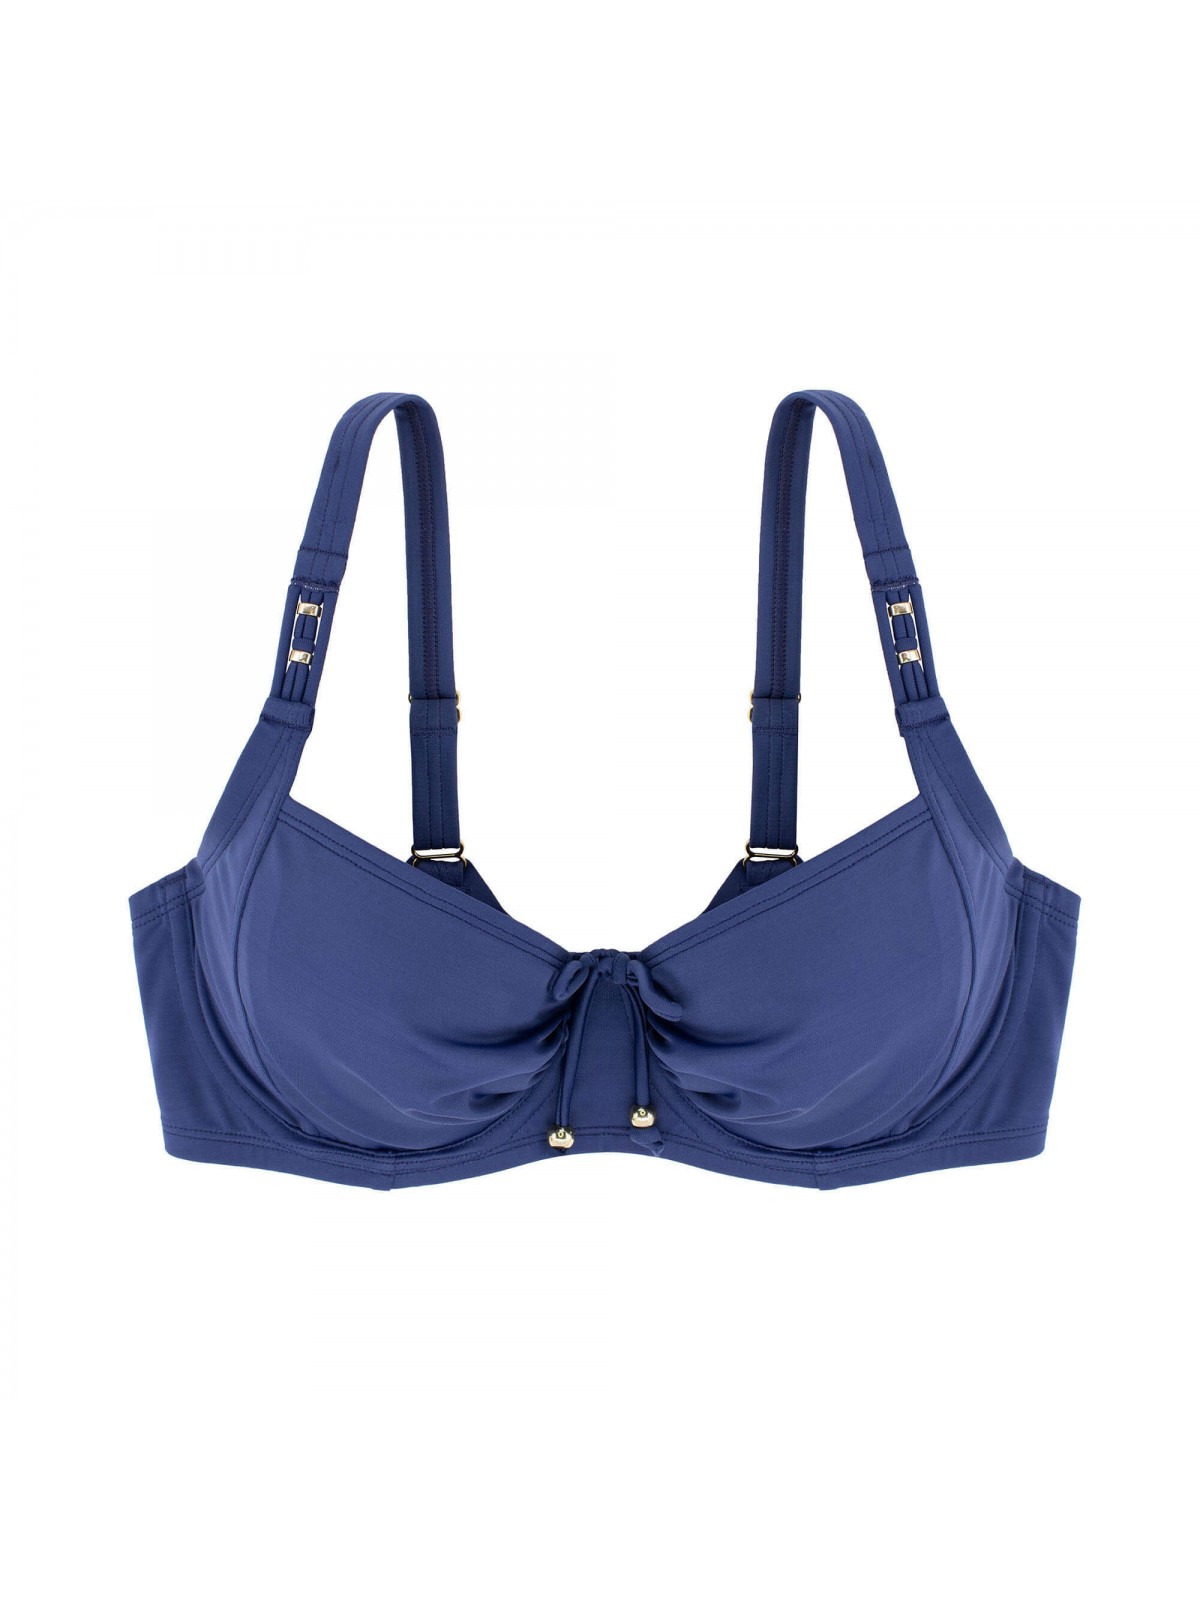 CORSICA NON PADDED BIKINI TOP ULL CUP, WITH WIRE